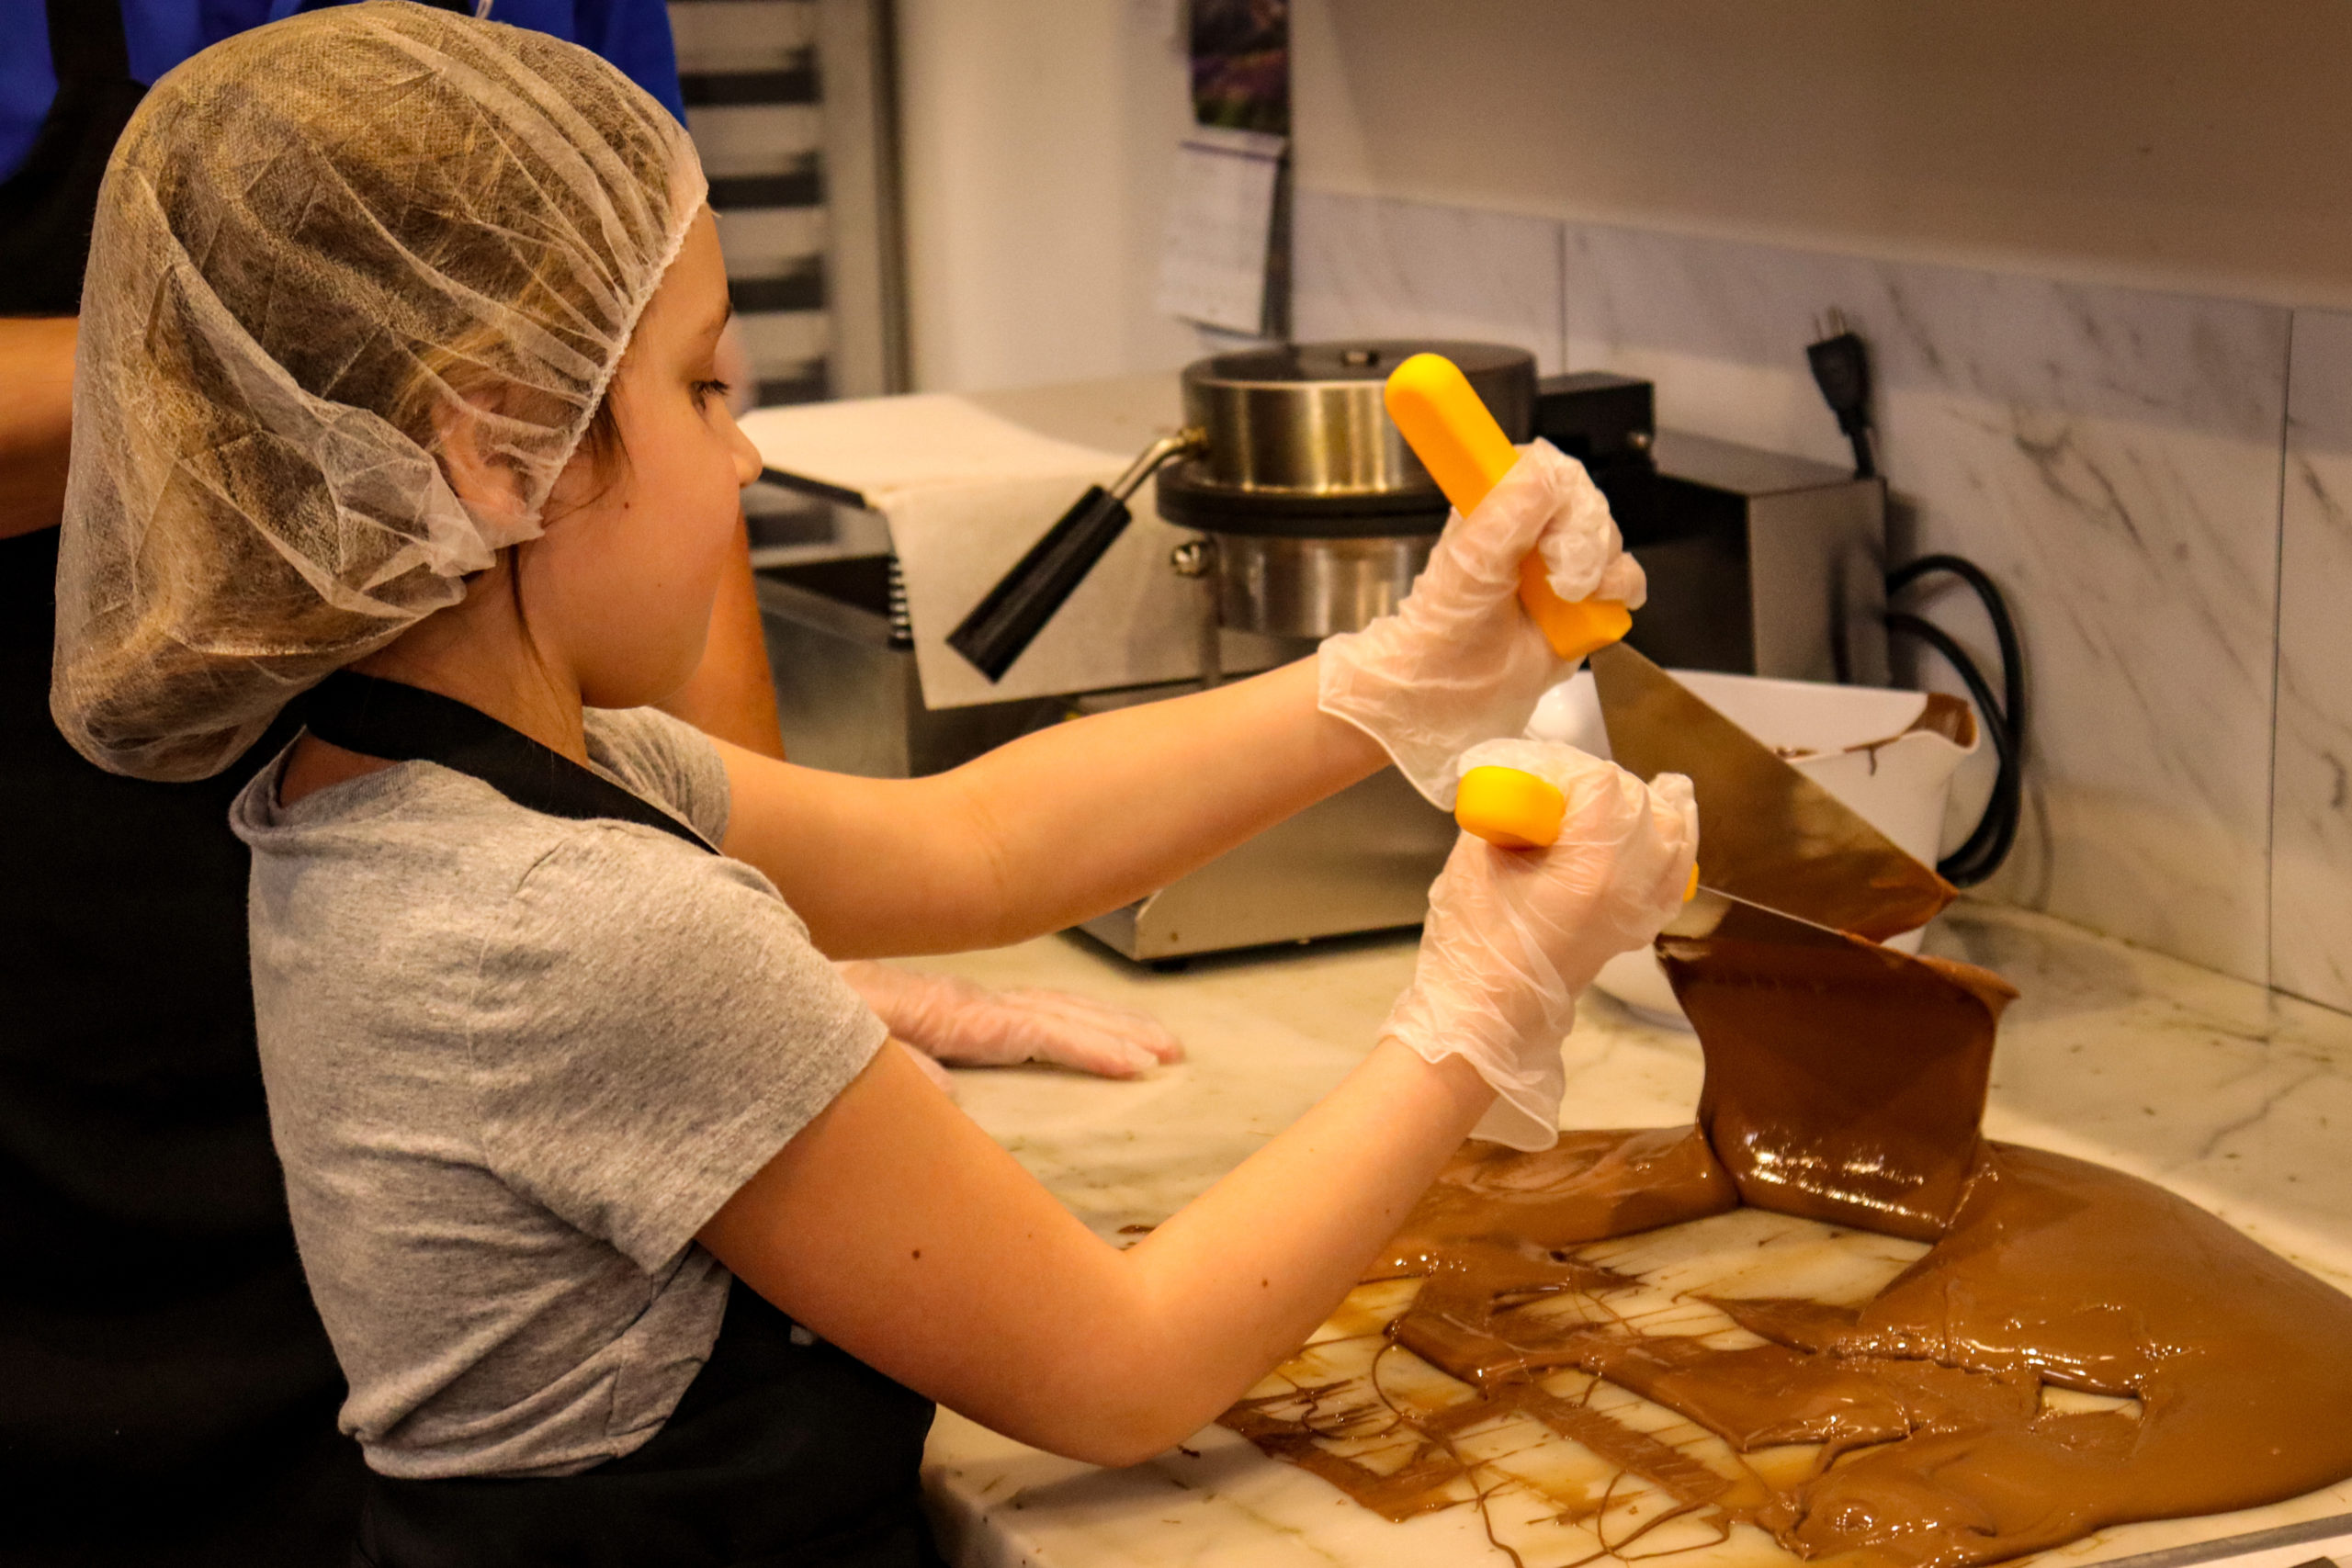 A young girl works to temper chocolate during a class at Peterbrooke Chocolatier Tampa Downtown.